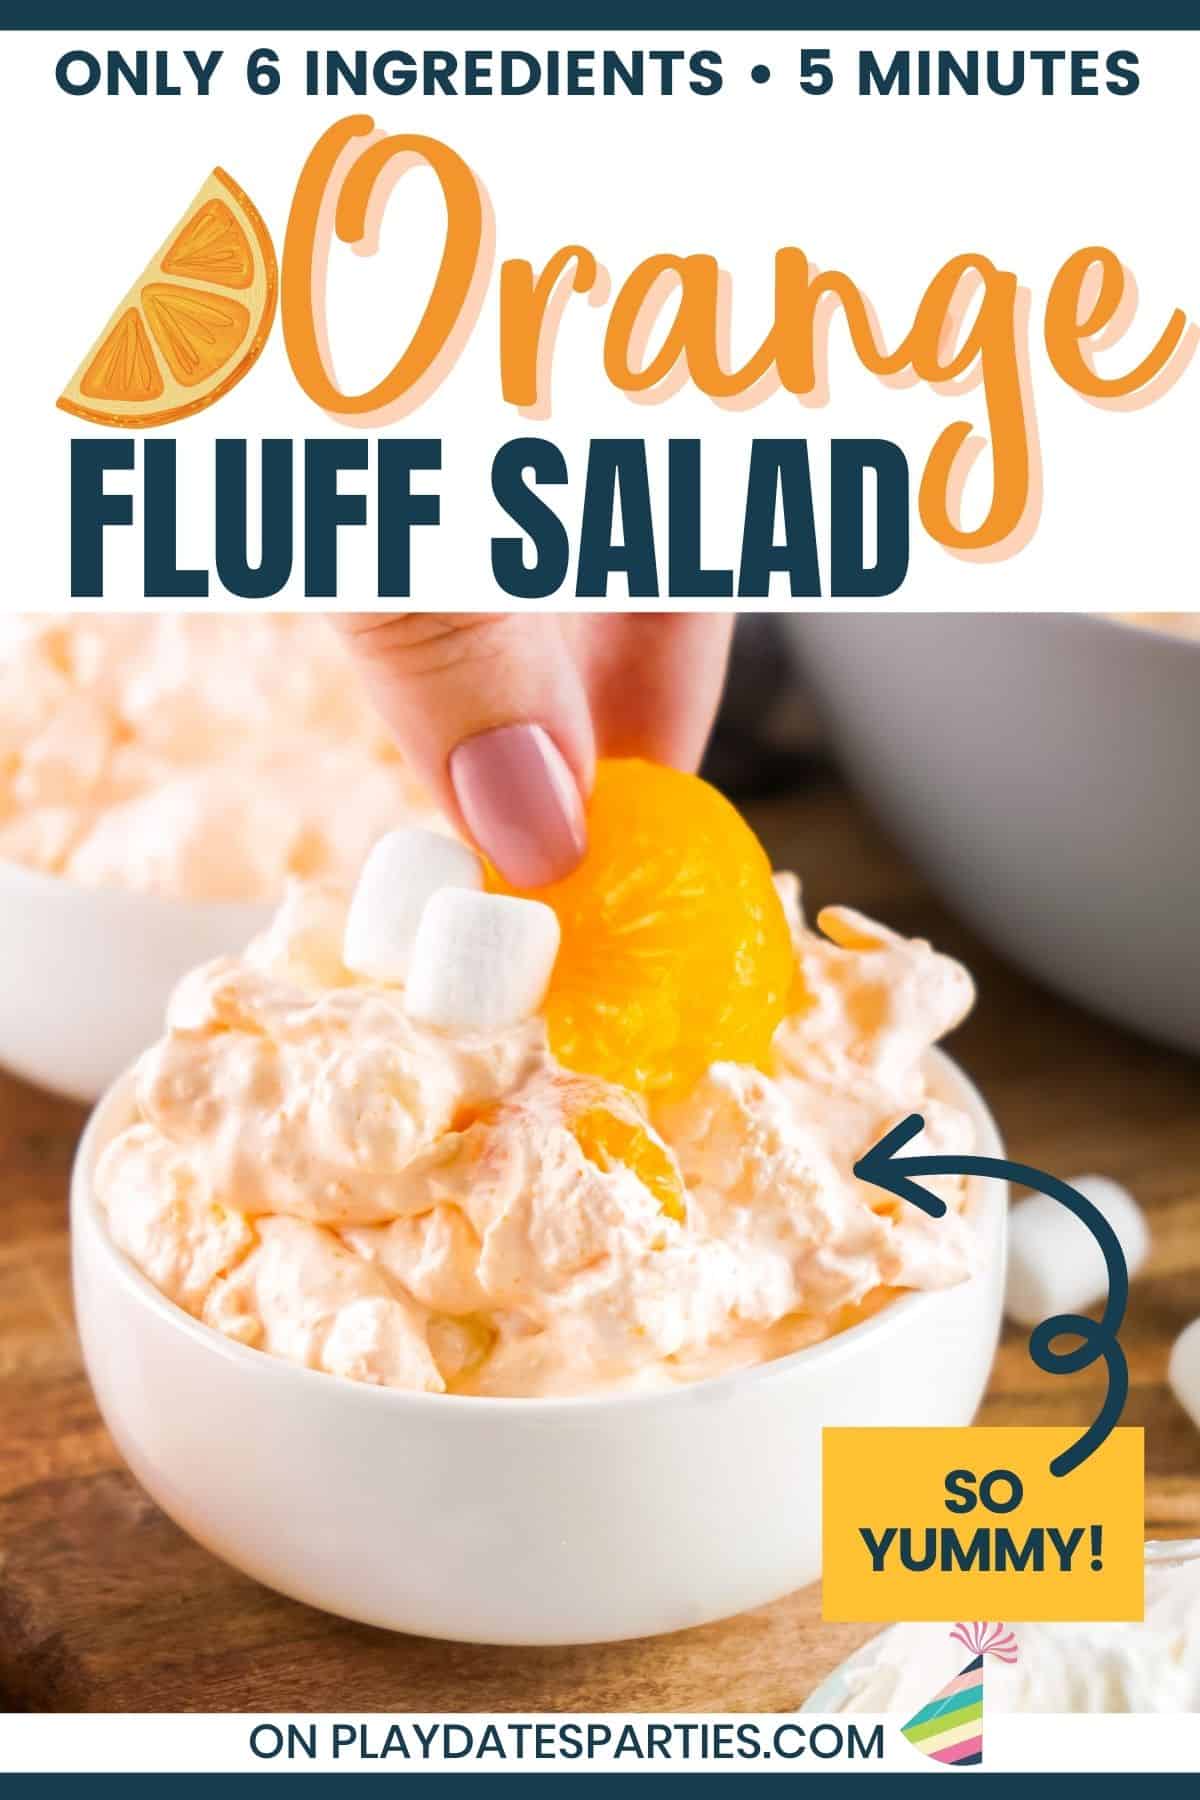 Orange fluff salad in a single serving bowl being garnished with extra mandarins and mini marshmallows.